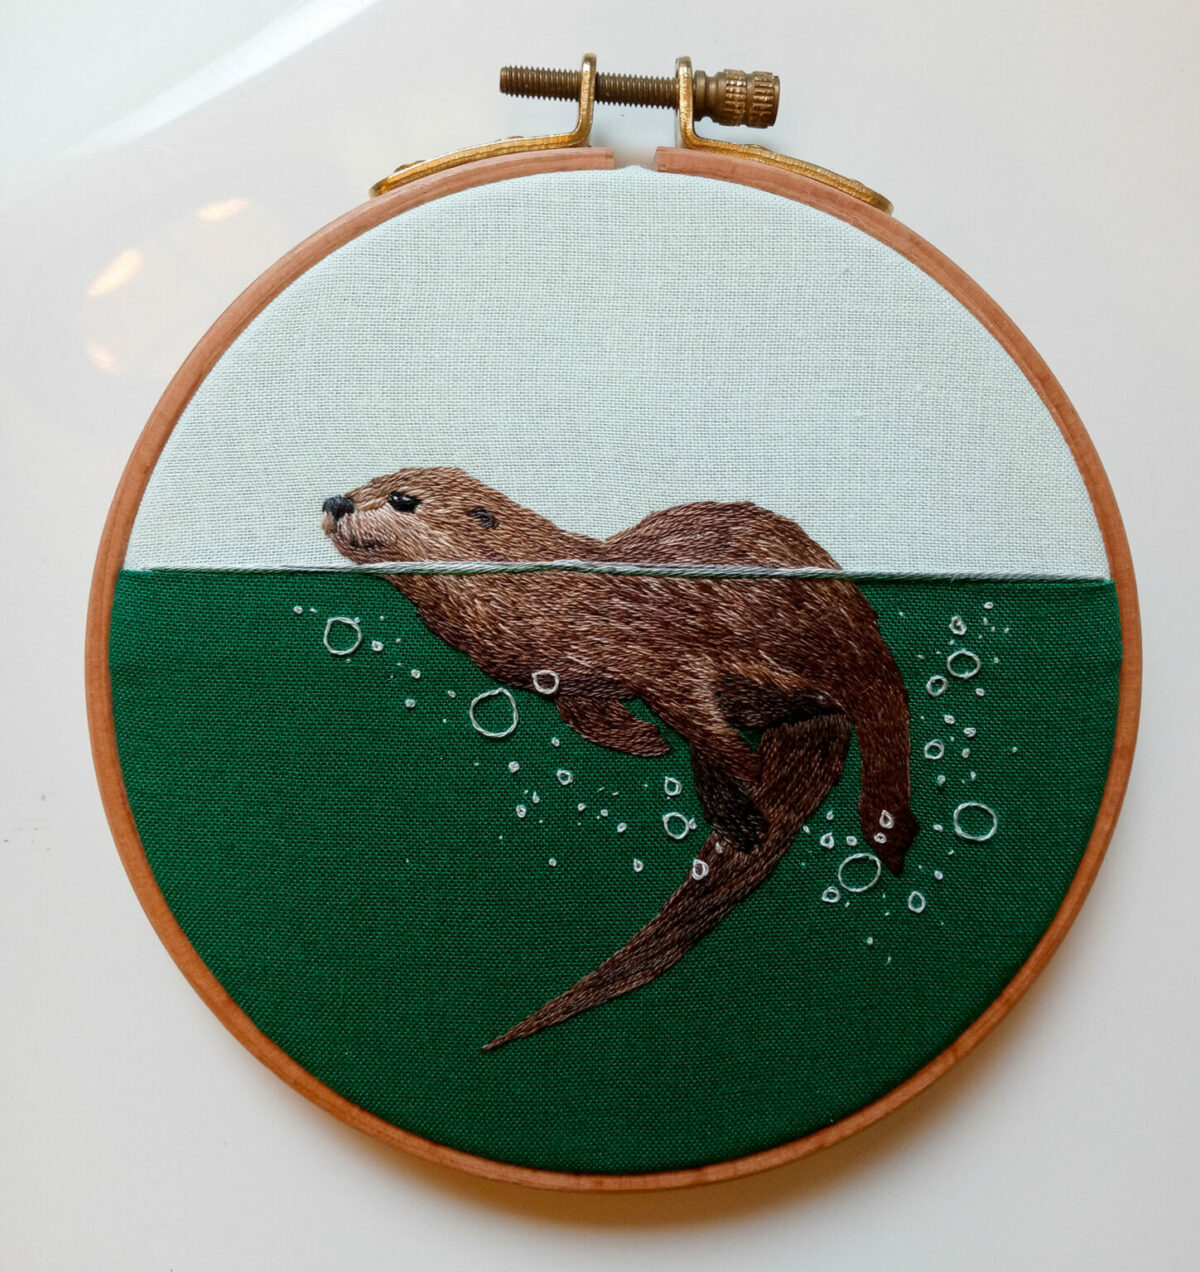 Gorgeous Embroideries Of Animals Plunging Into The Waters By Megan Zaniewski 14